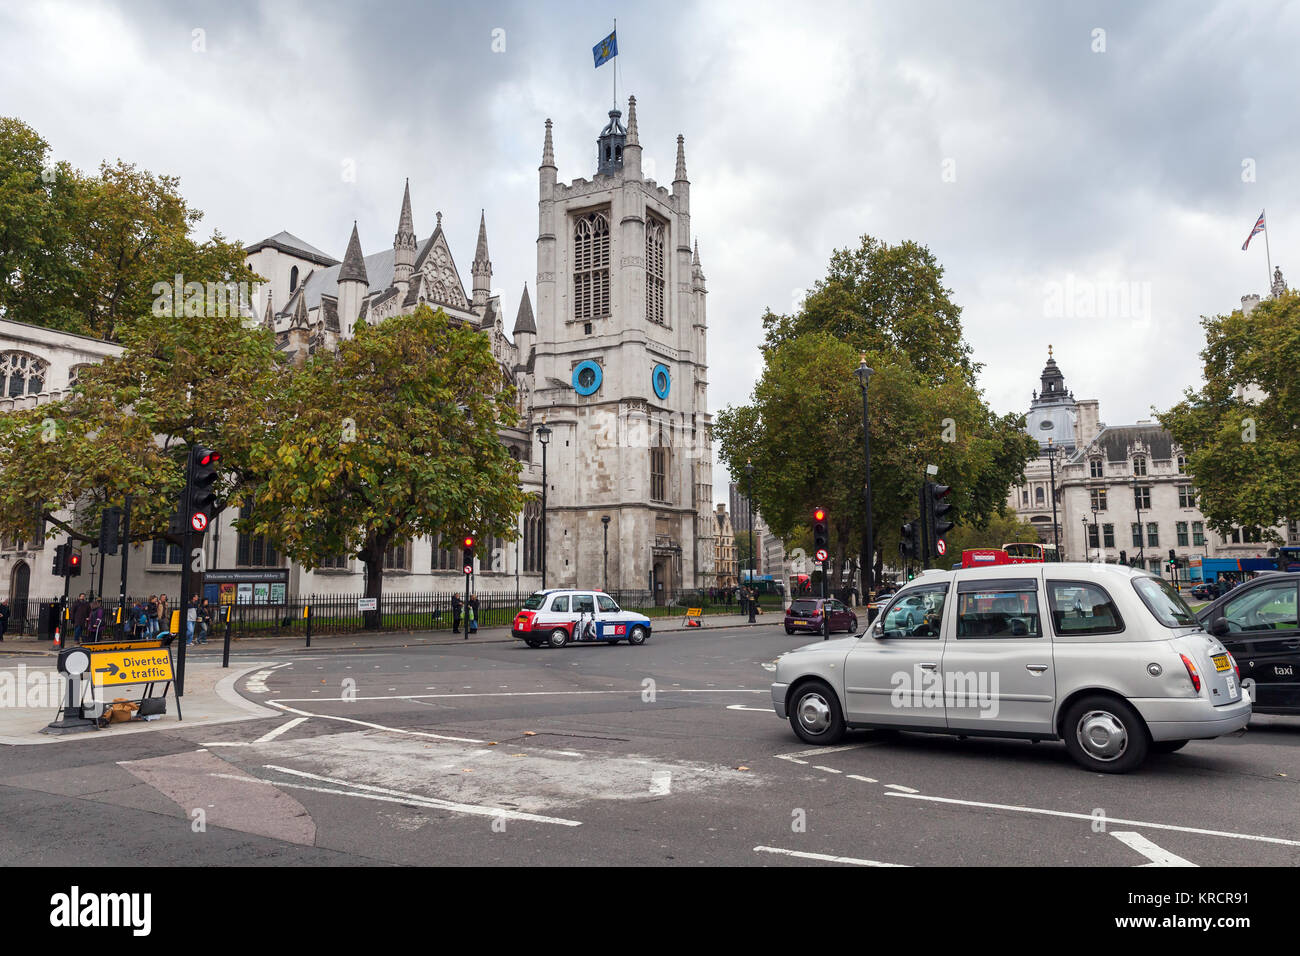 London, United Kingdom - October 29, 2017: Taxi cabs go on the street in London city Stock Photo